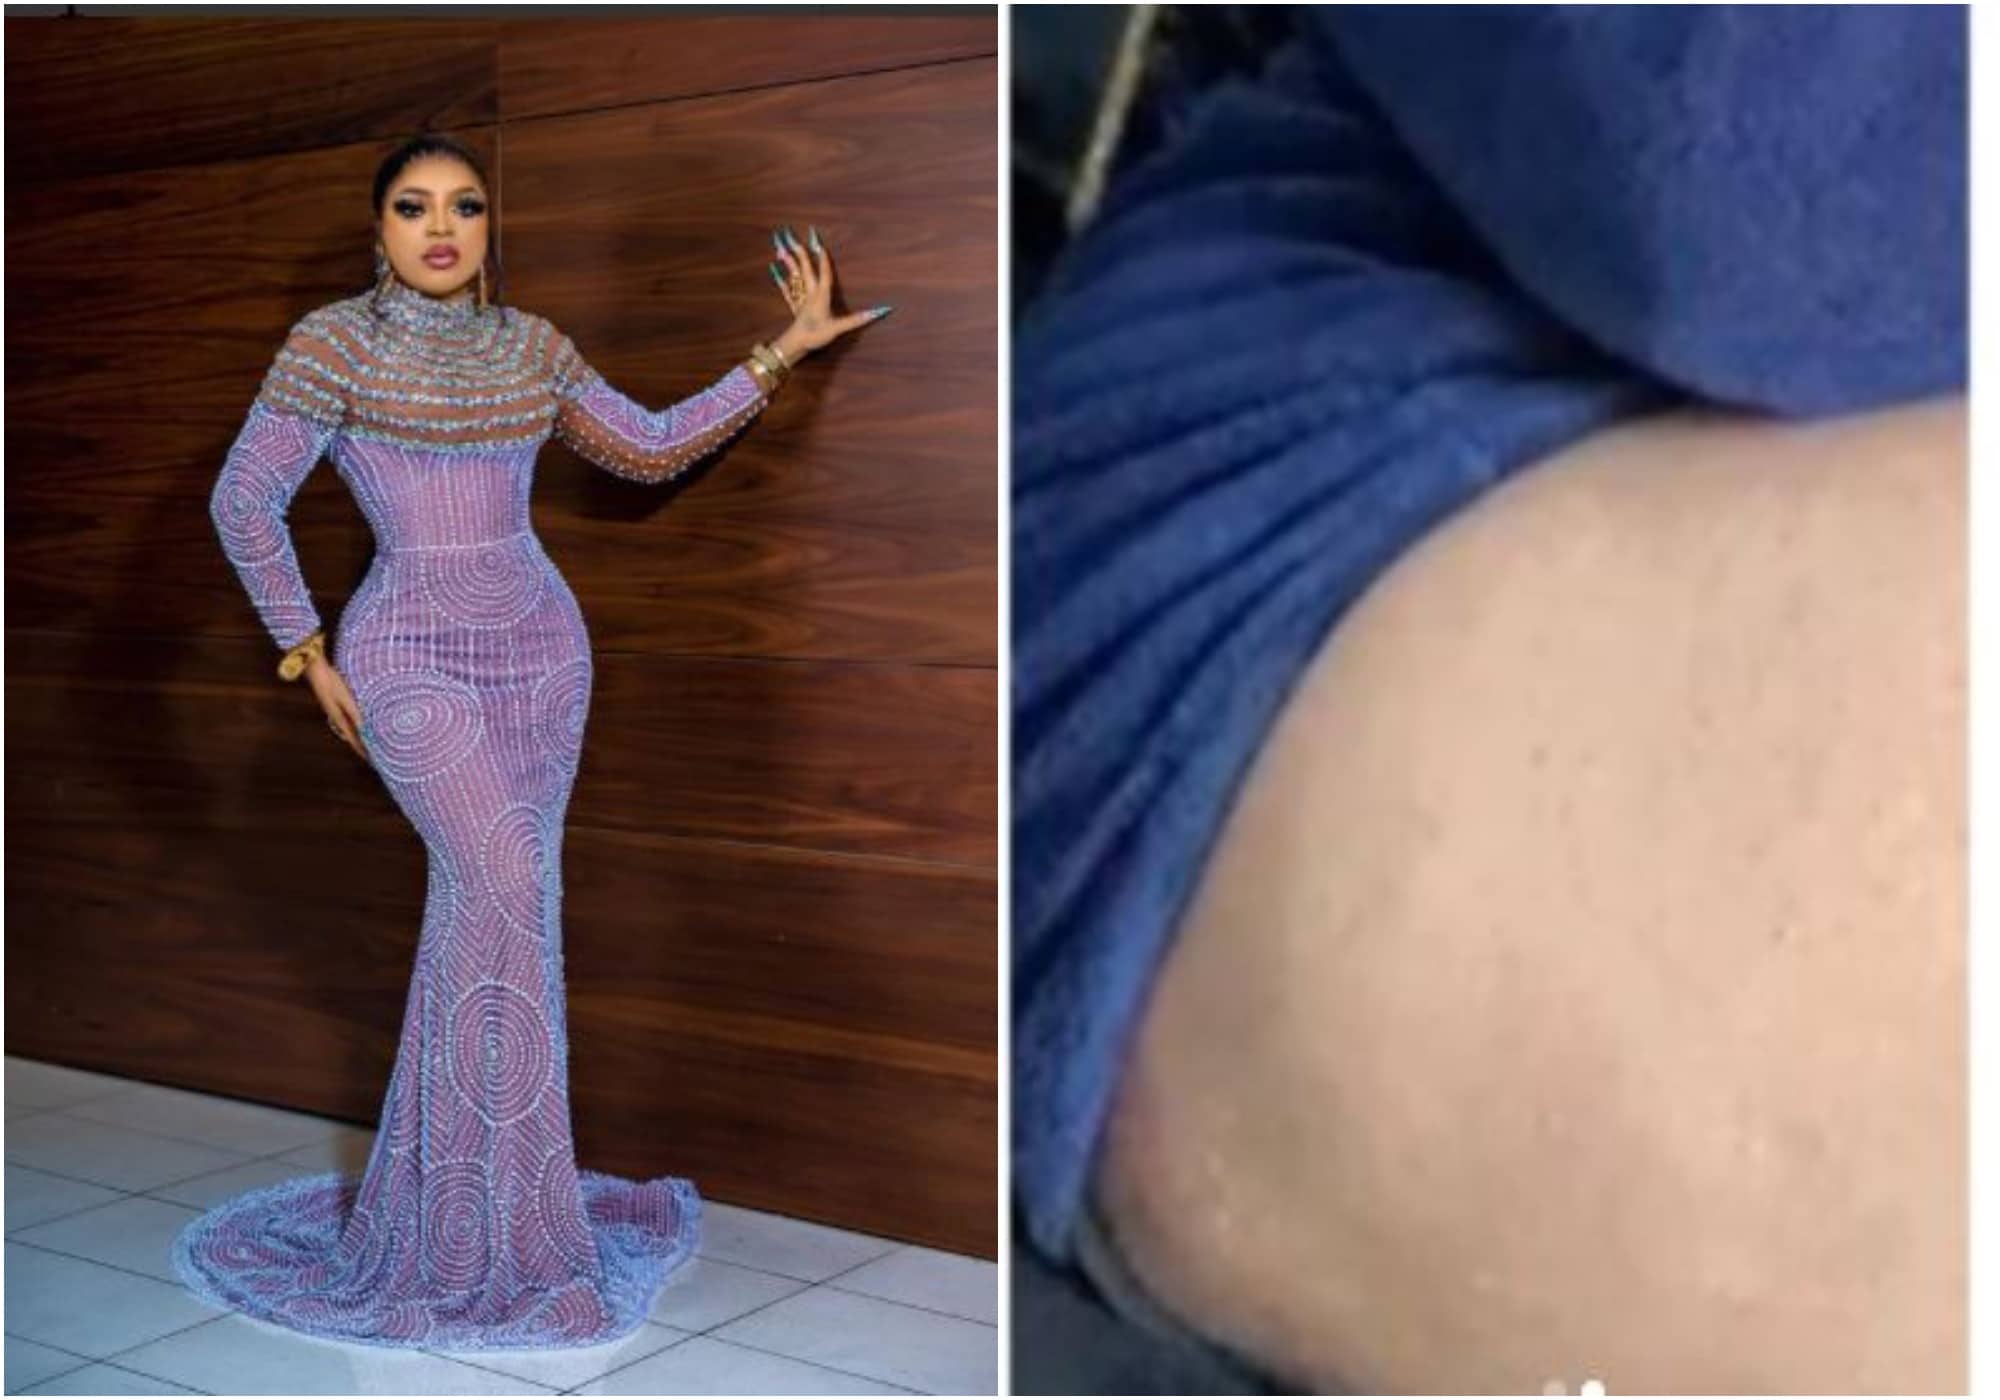 Bobrisky's big lap with rashes covering his yansh causes a stir on social media